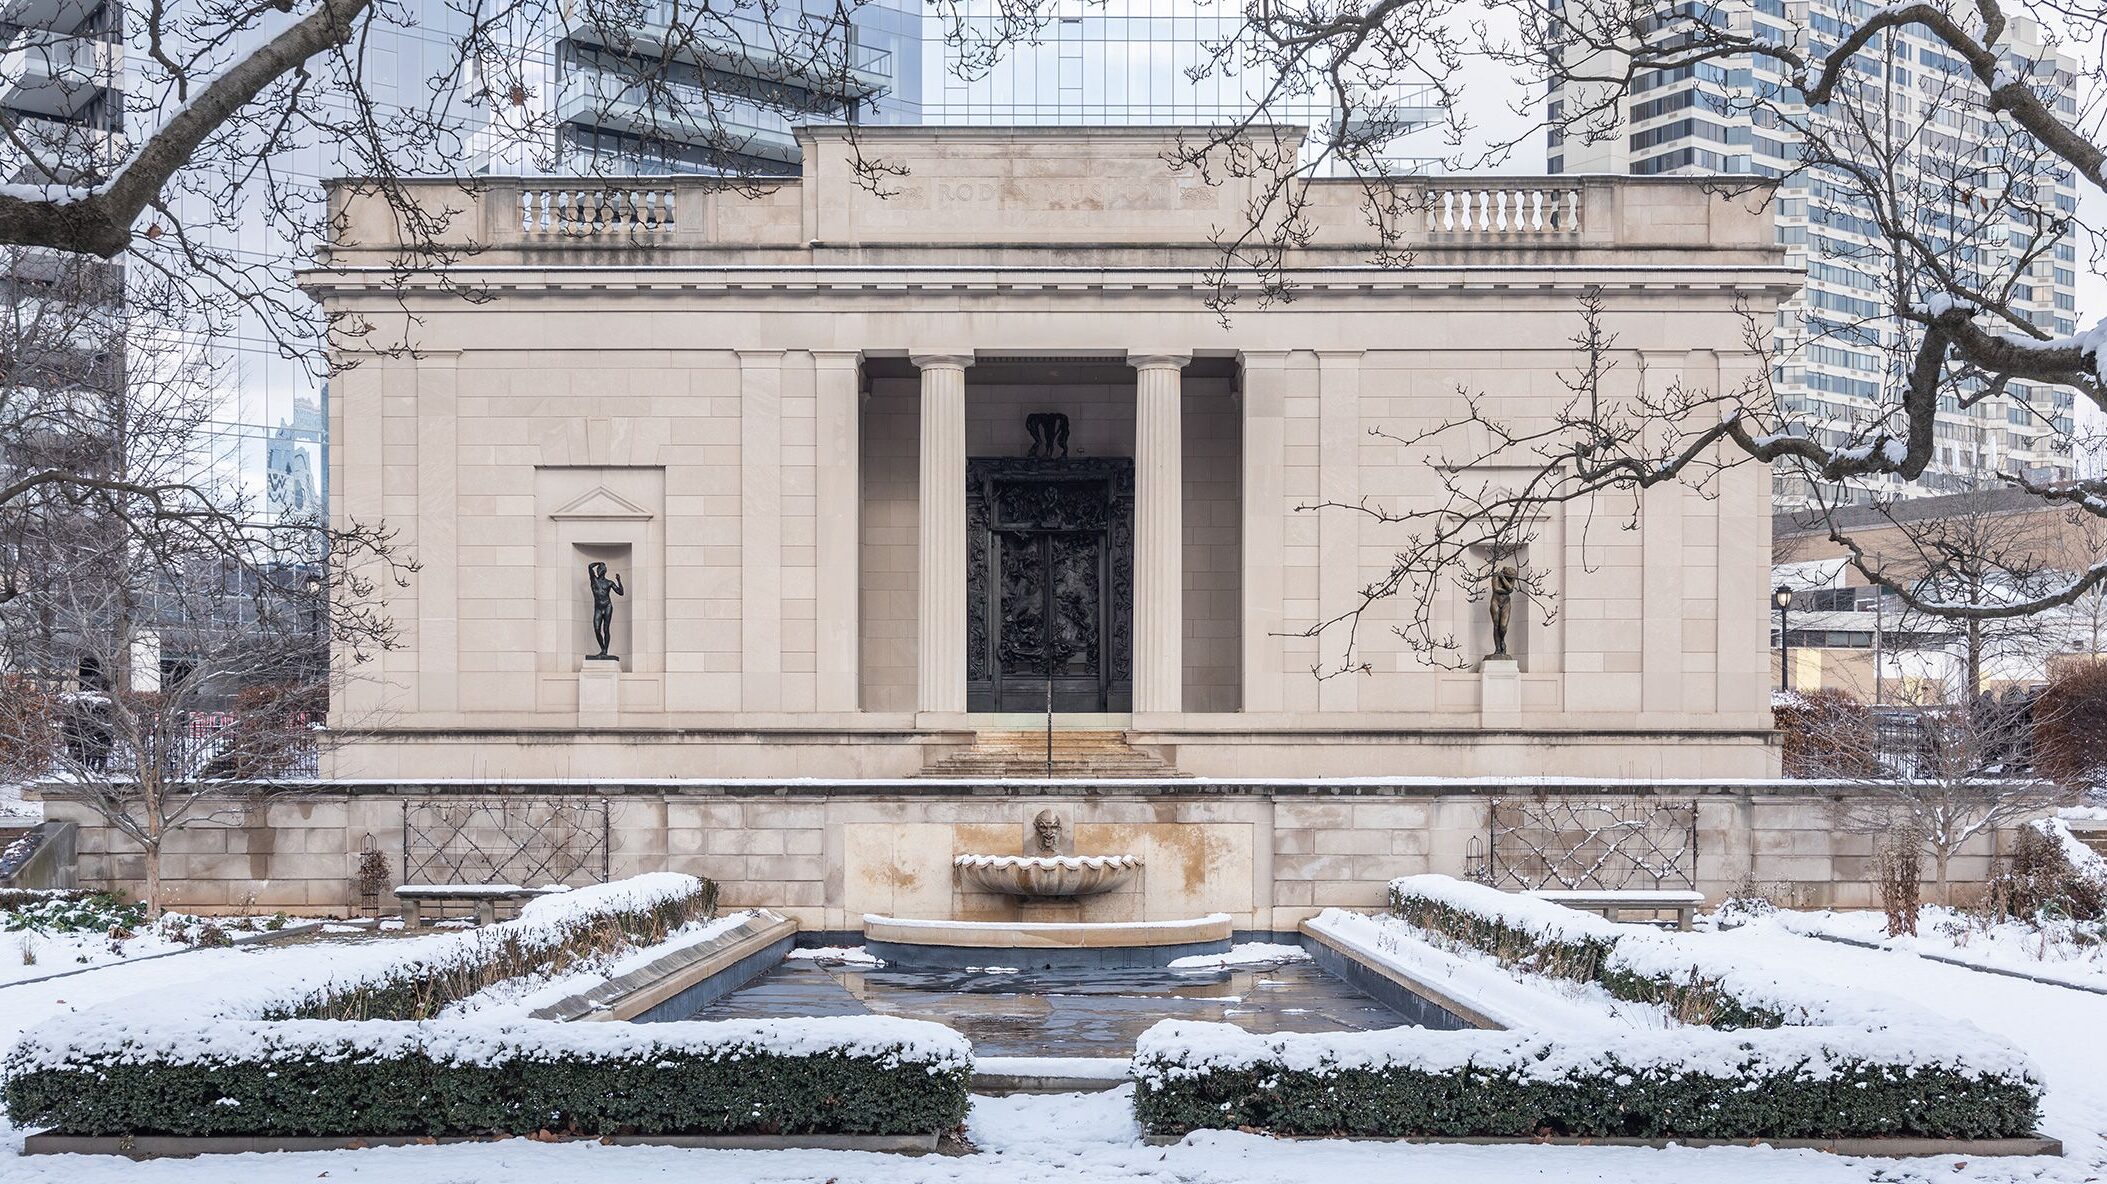 The Rodin Museum in Philadelphia surrounded by snow in winter | Wintertime outdoor engagement session locations in Philadelphia